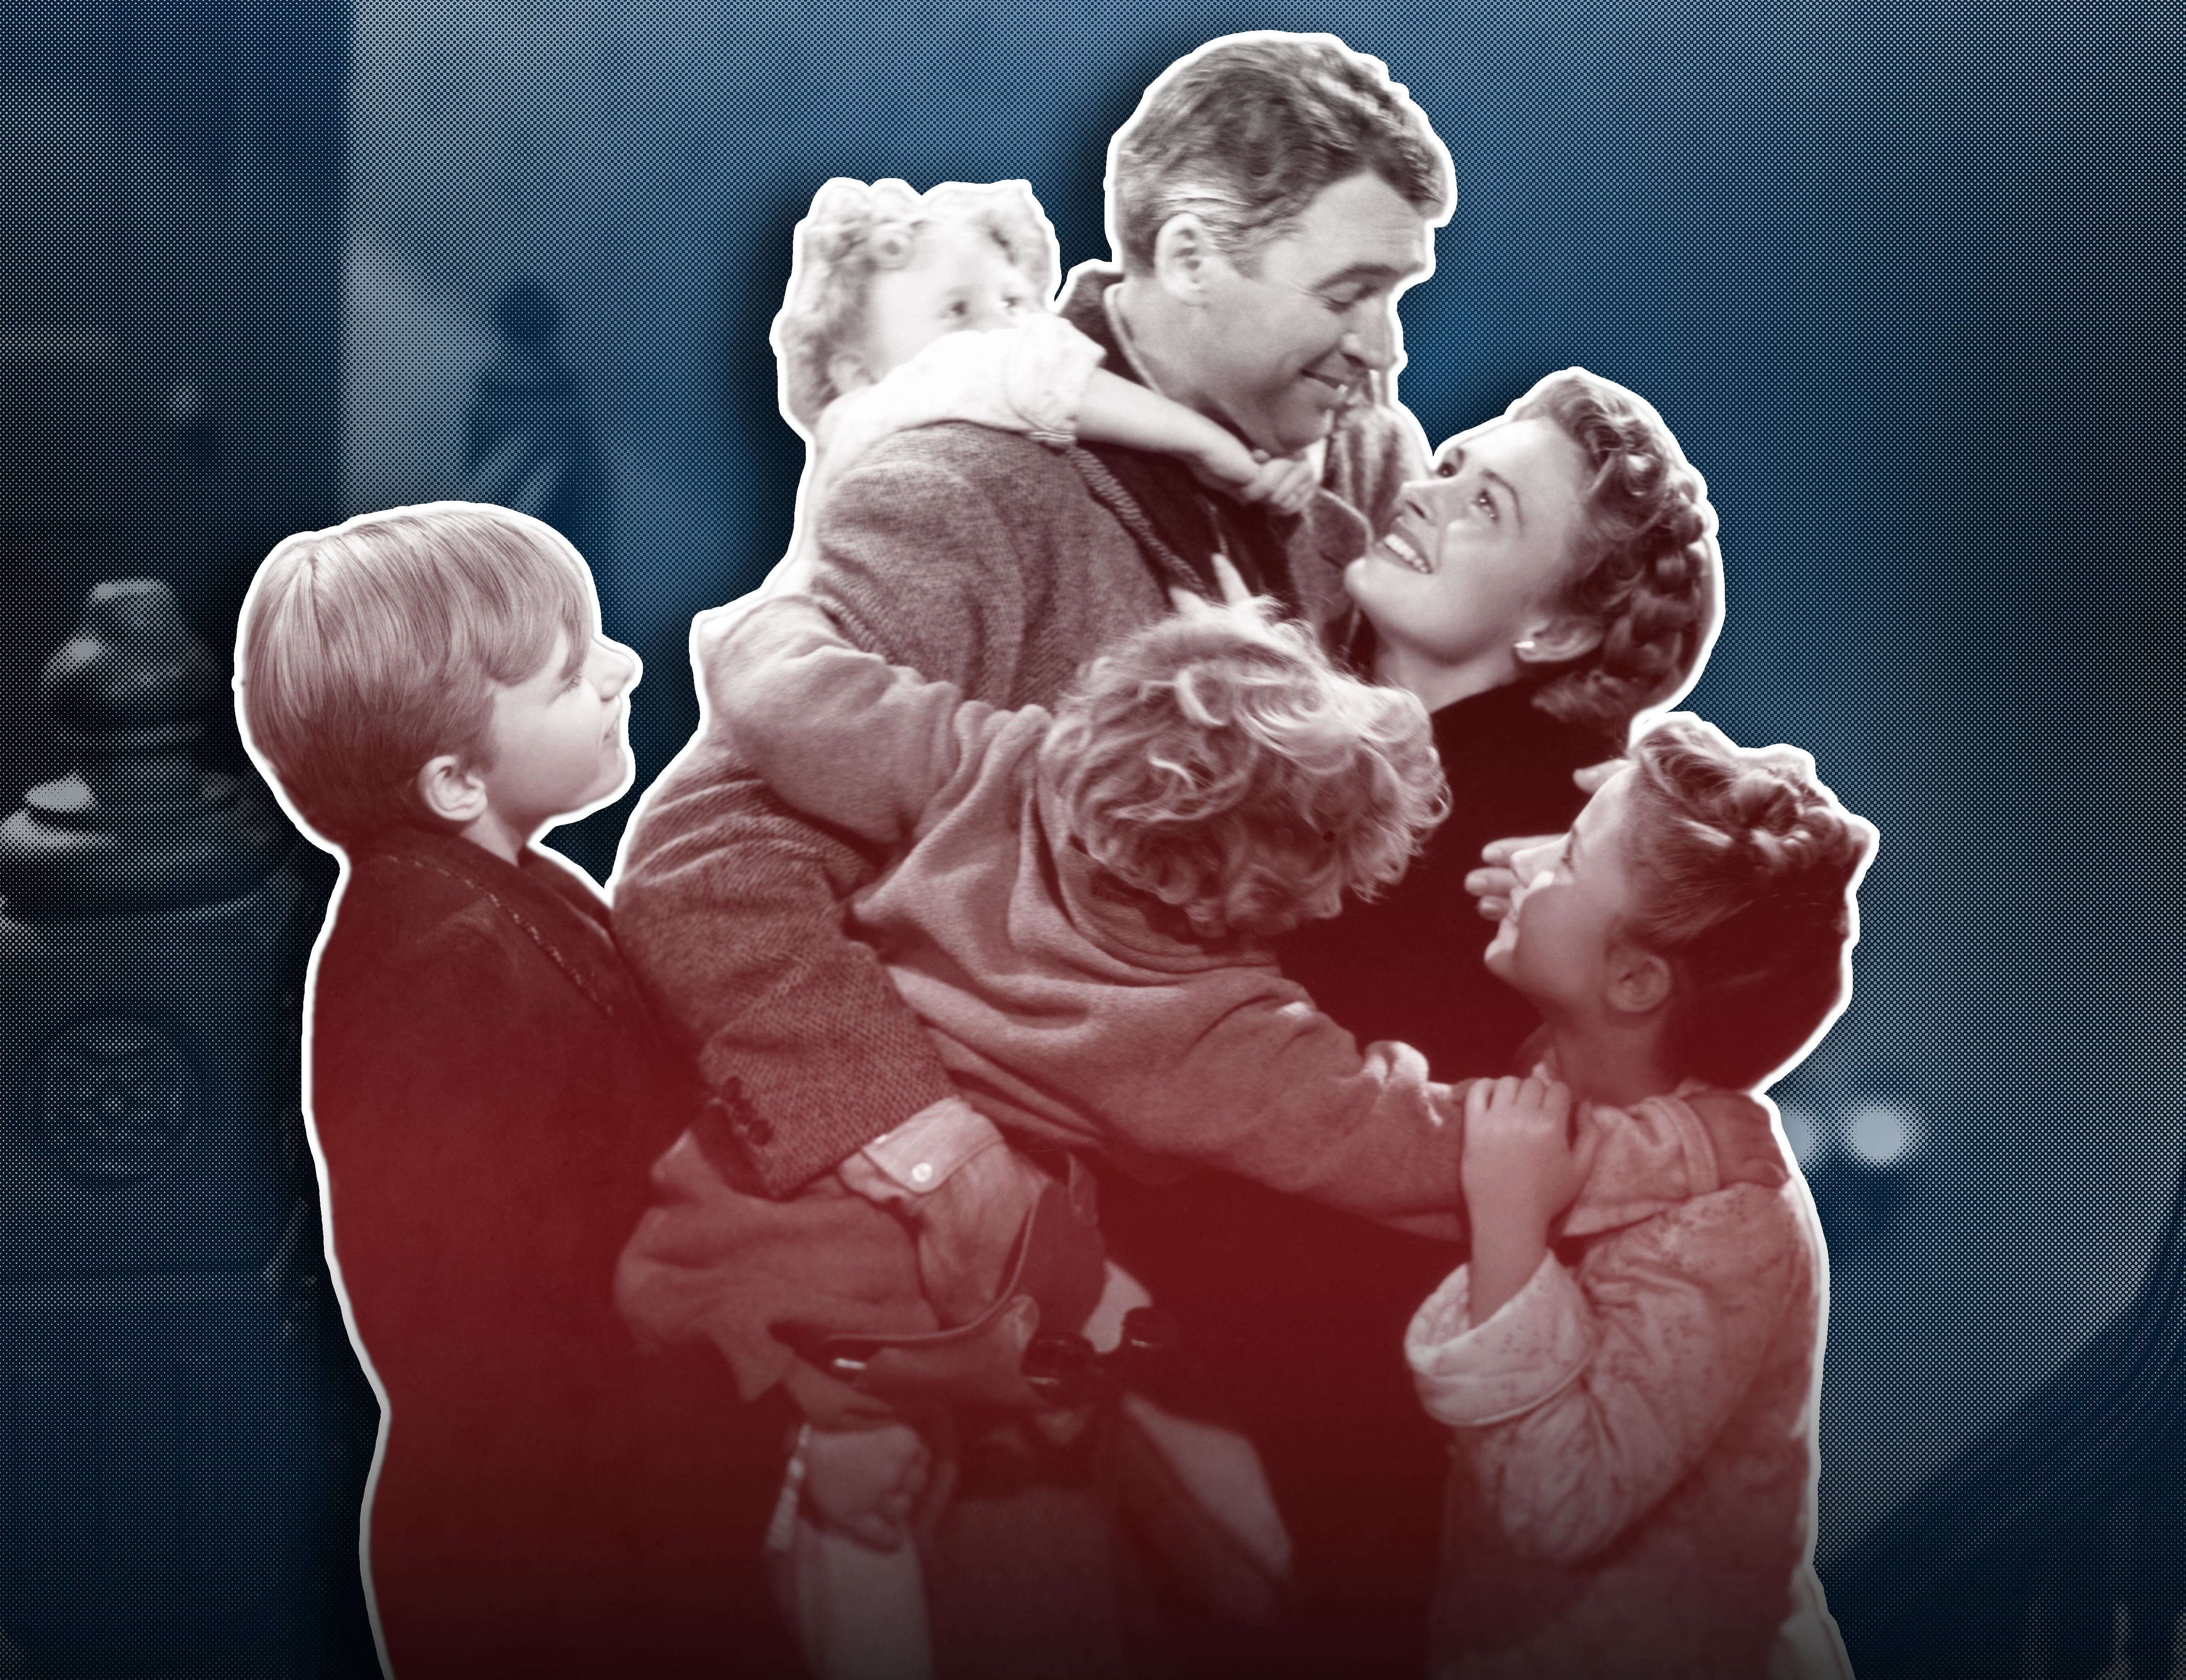 Its A Wonderful Life The Miraculous Origins Of A Christmas Classic HuffPost Latest News pic